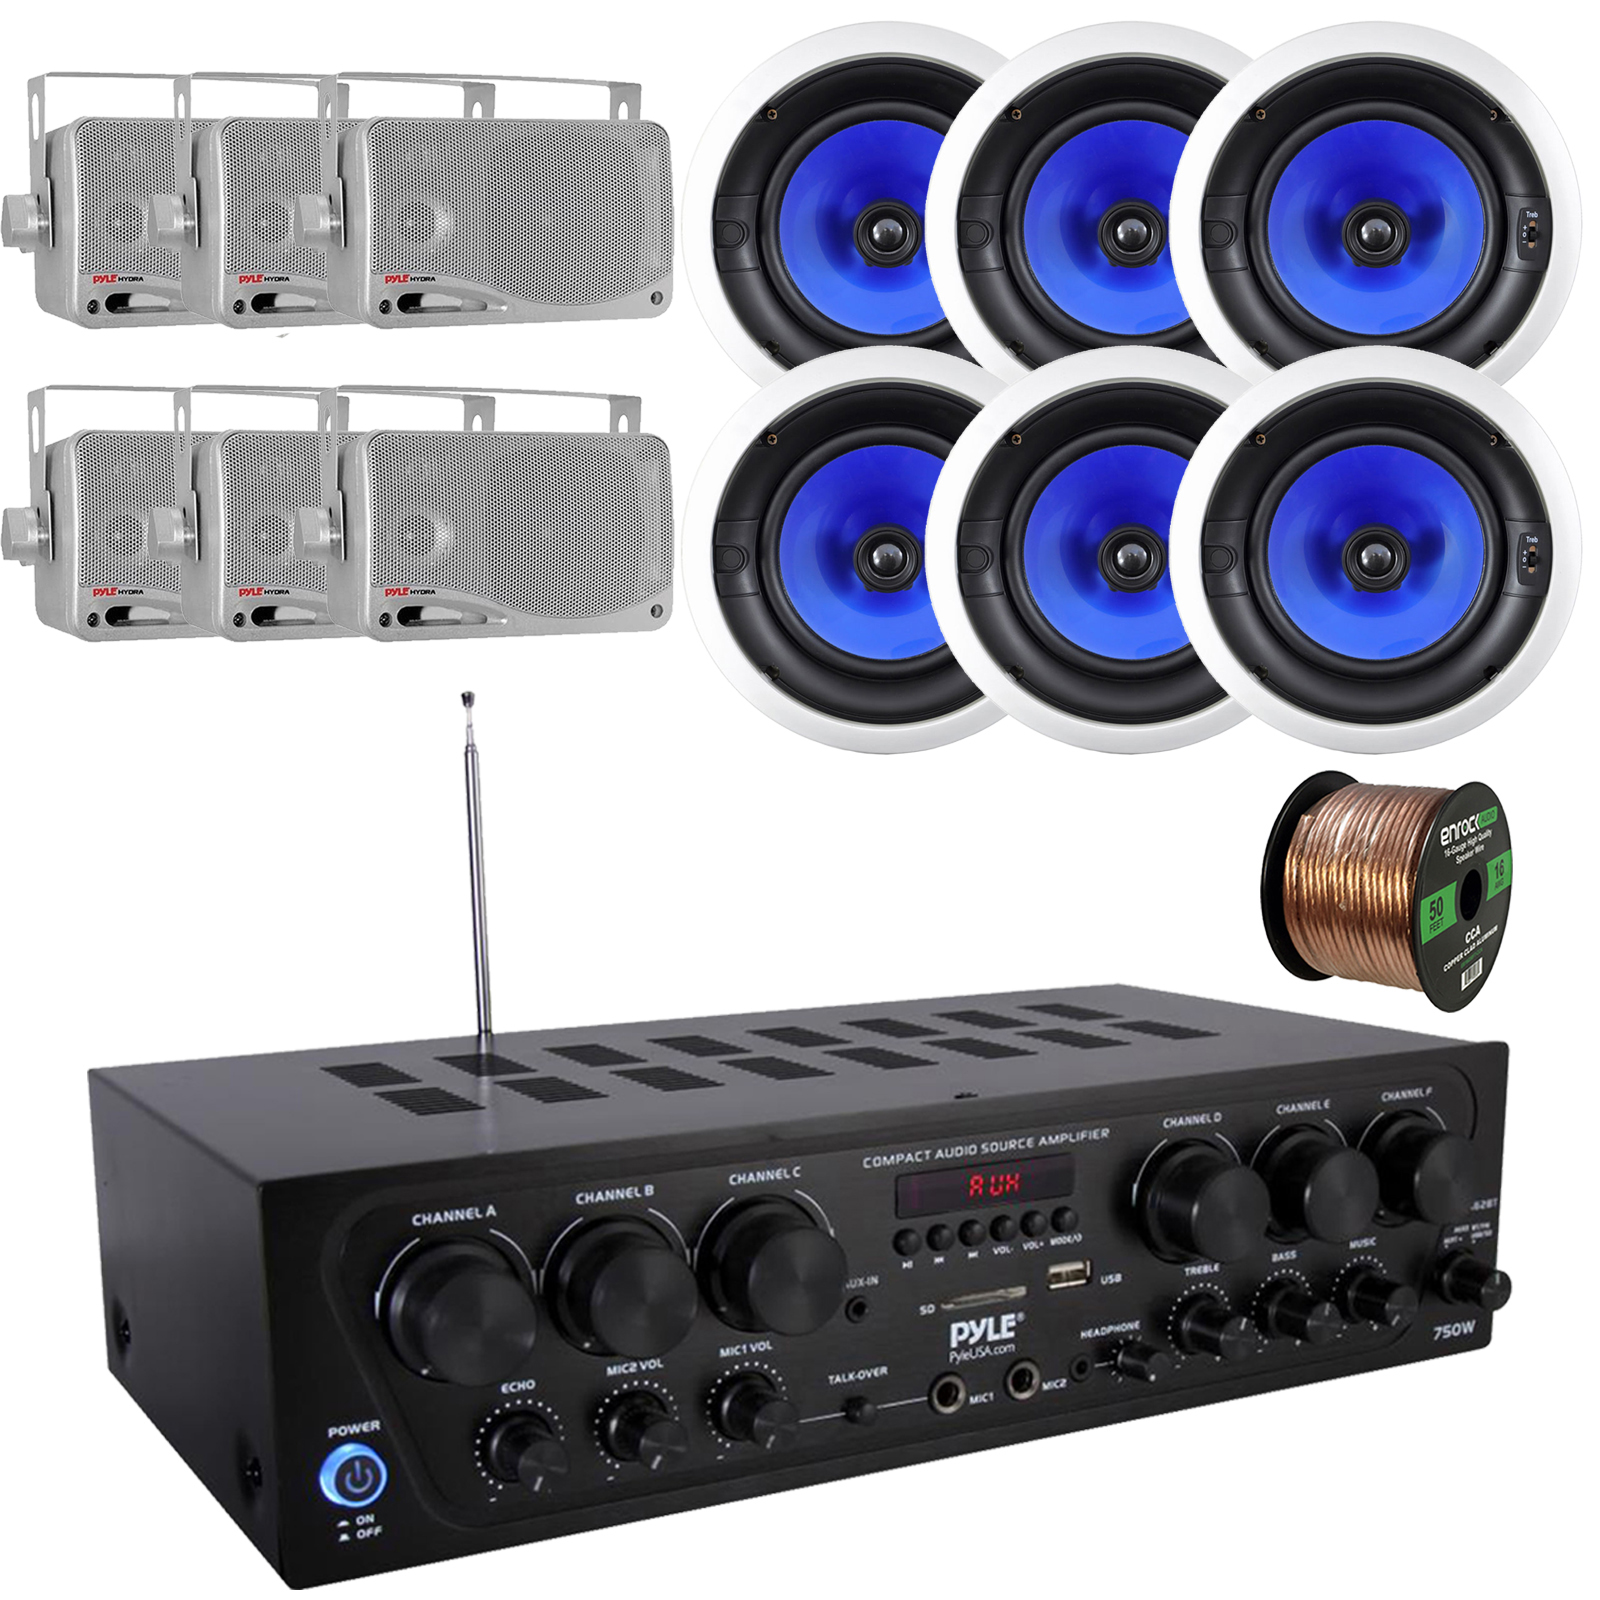 Pyle 6-Channel 750W Bluetooth USB AUX FM Stereo Amplifier Receiver System Bundle Combo with 6x 8" 2-Way Full Range In-Ceiling Stereo Speakers, 6x 3.5'' 3-Way Silver Mini Box Speakers, Speaker Wire - image 1 of 5